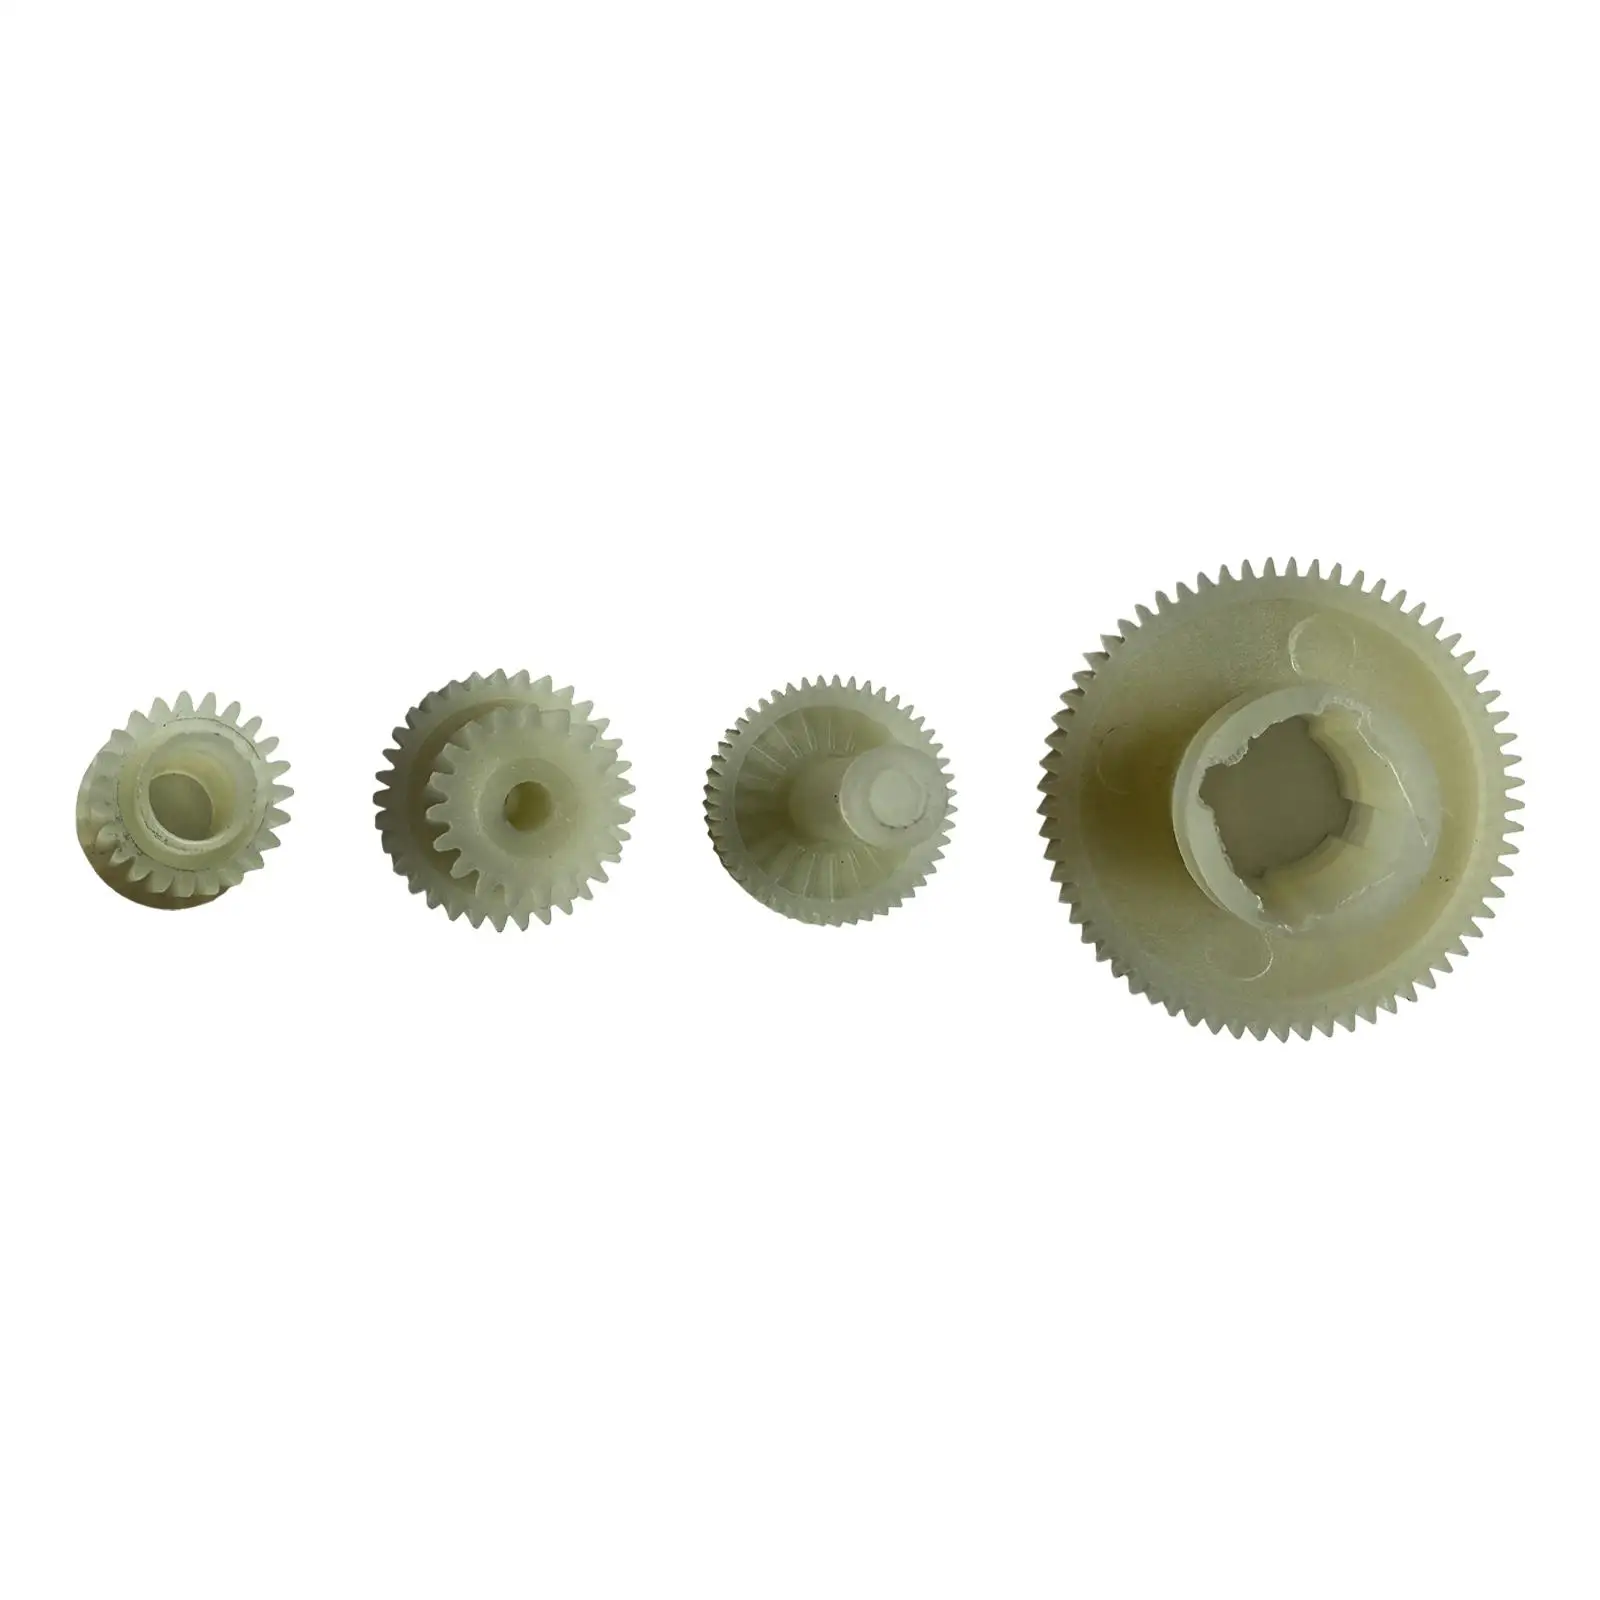 Parking Hand Brake Actuator Gear Repair Kit High Performance Directly Replace Durable for Land Rover Discovery 3 4